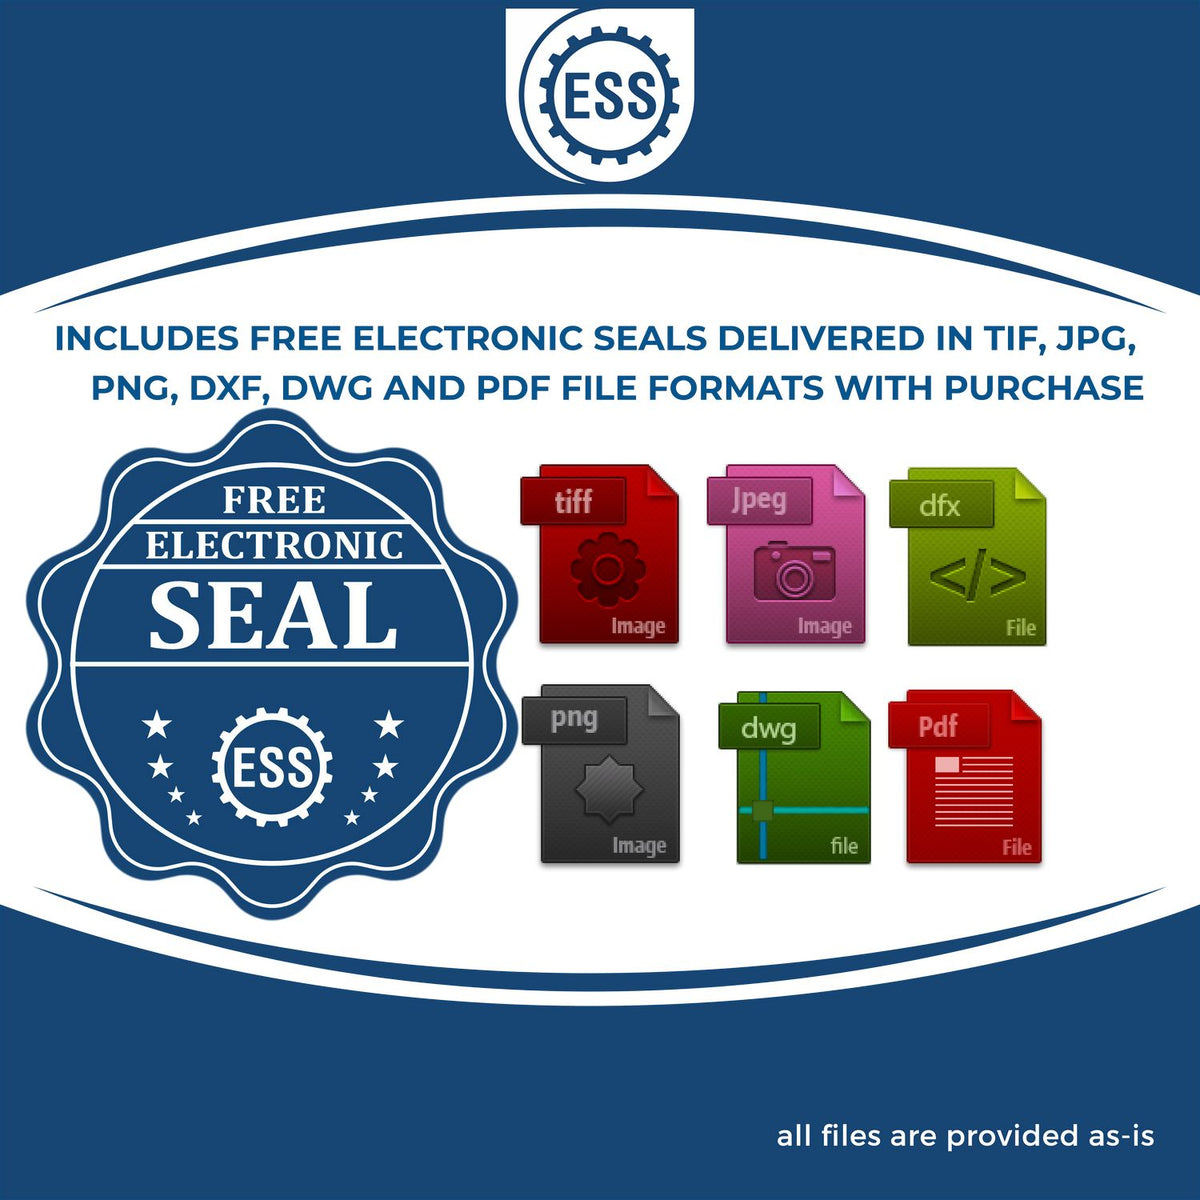 An infographic for the free electronic seal for the South Carolina Professional Engineer Seal Stamp illustrating the different file type icons such as DXF, DWG, TIF, JPG and PNG.